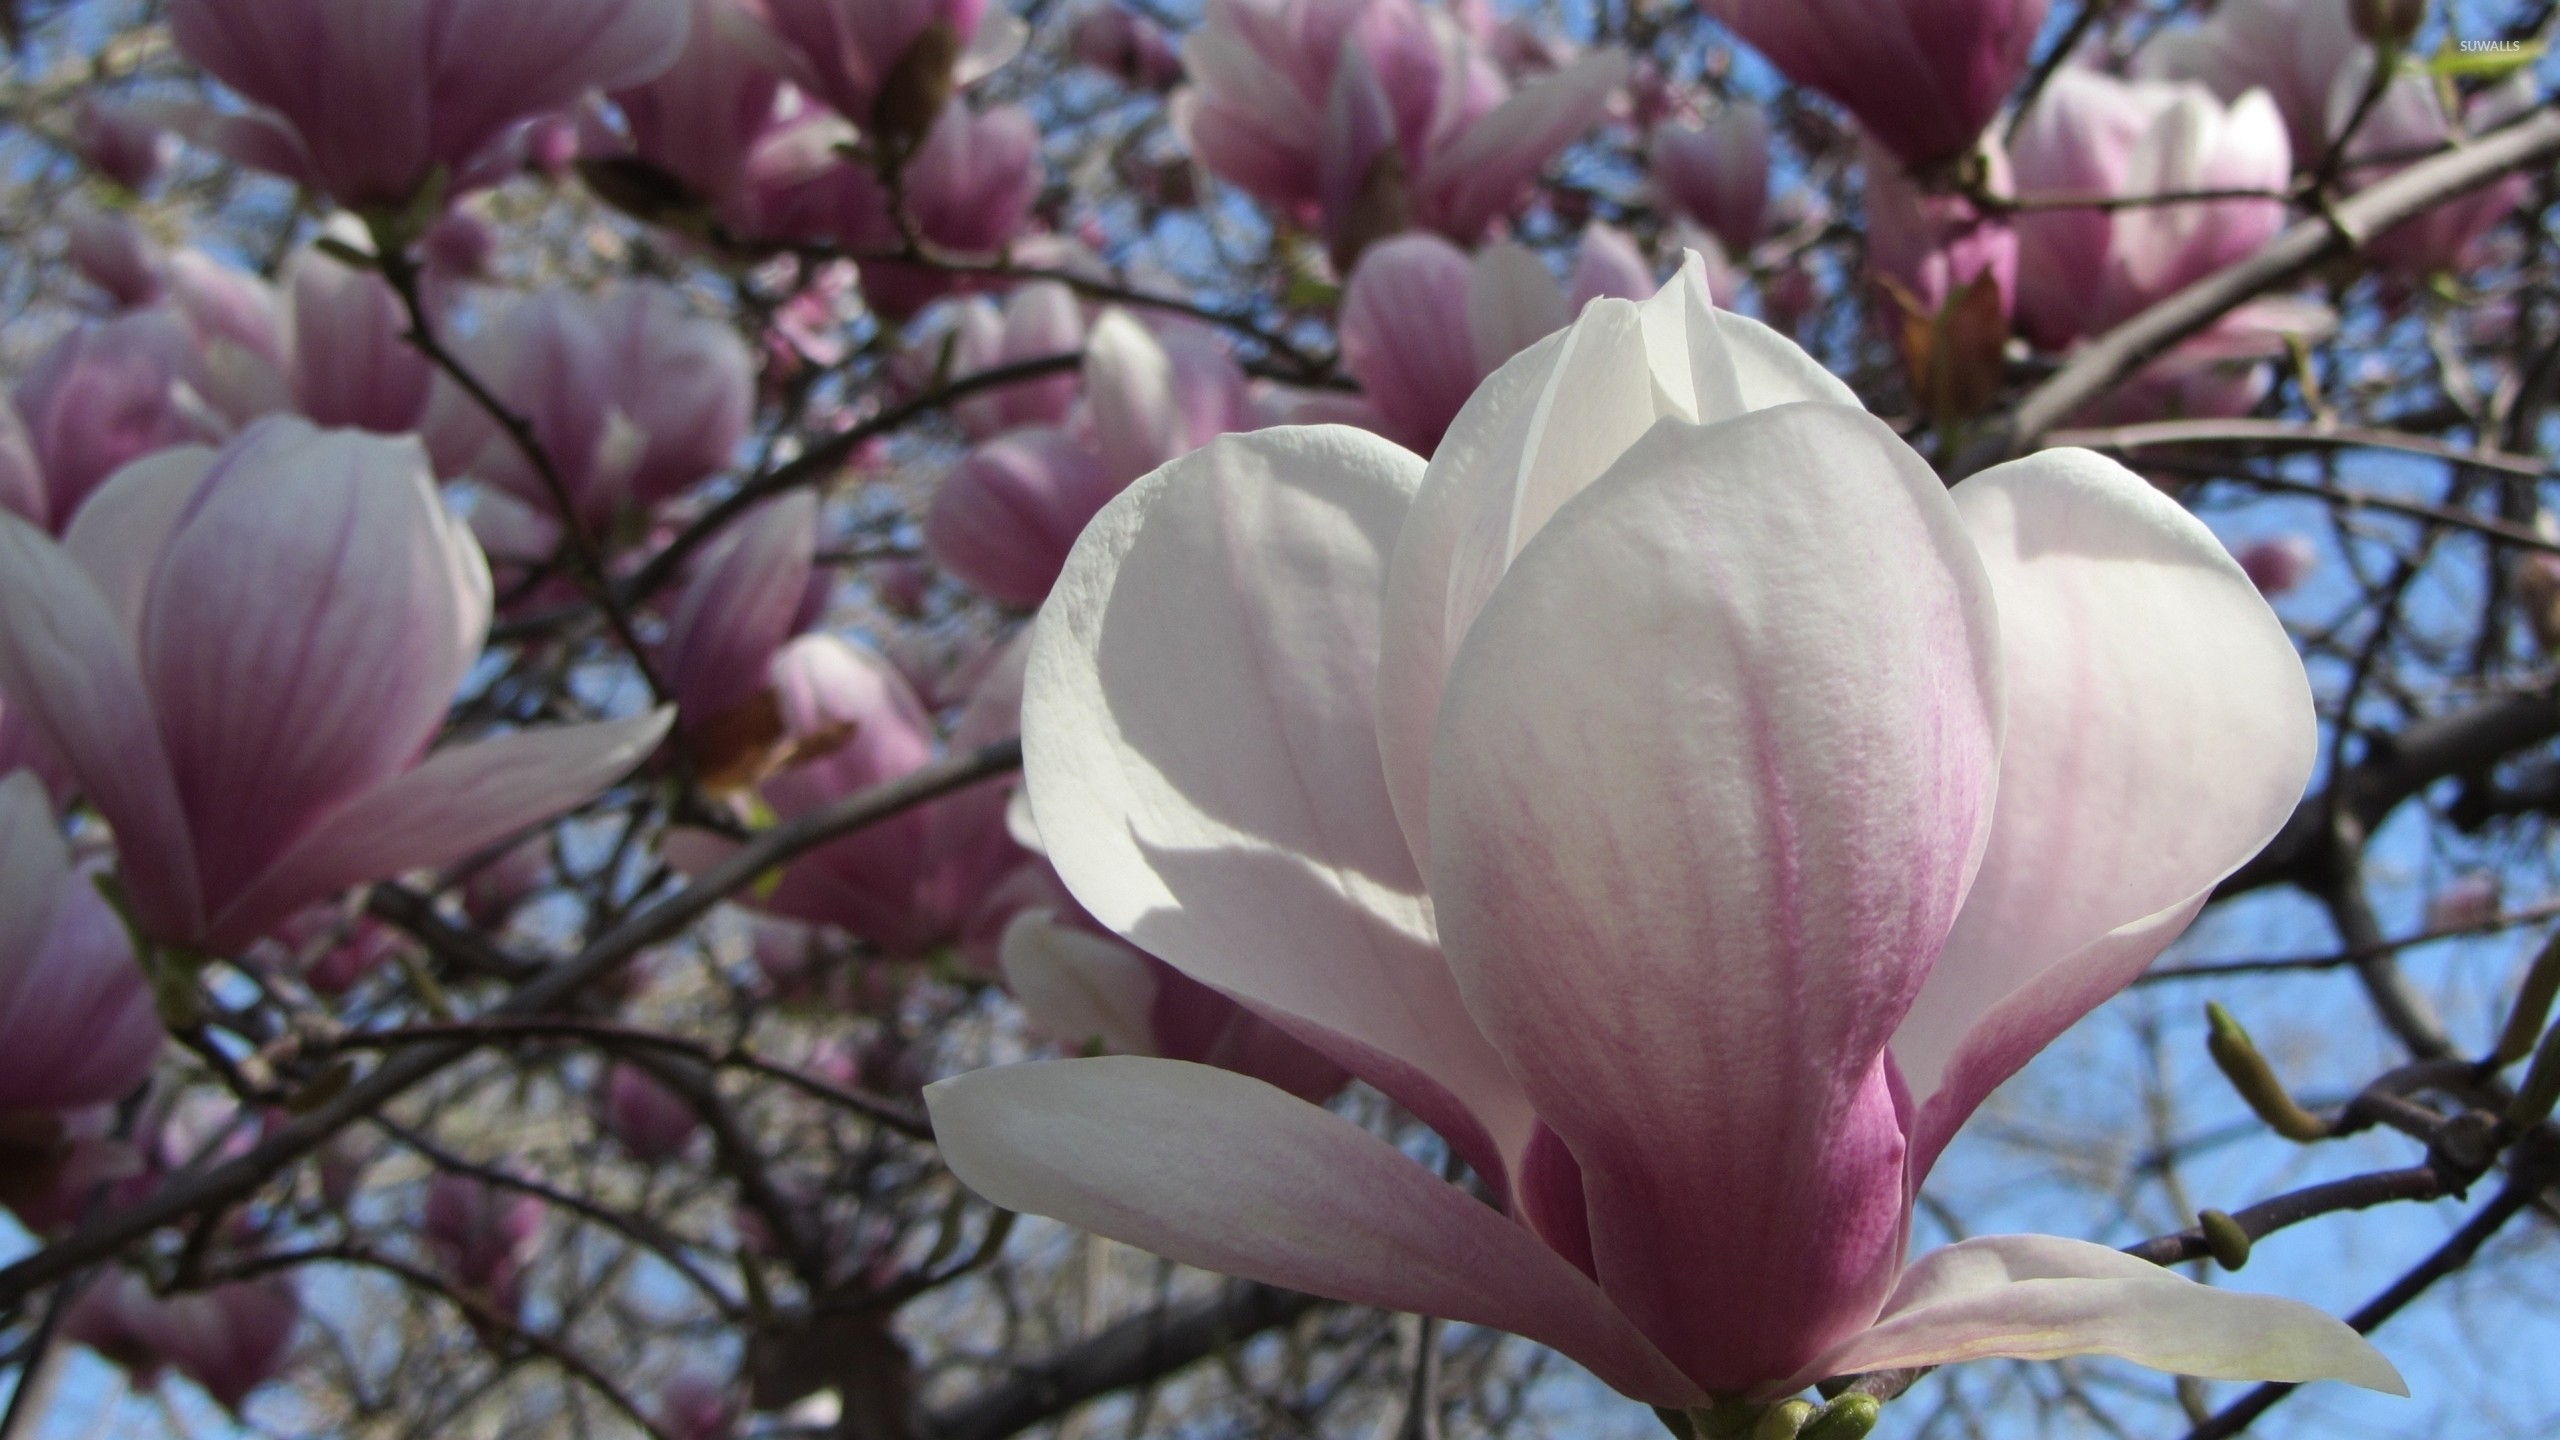 2560x1440 White with pink magnolia close-up wallpaper